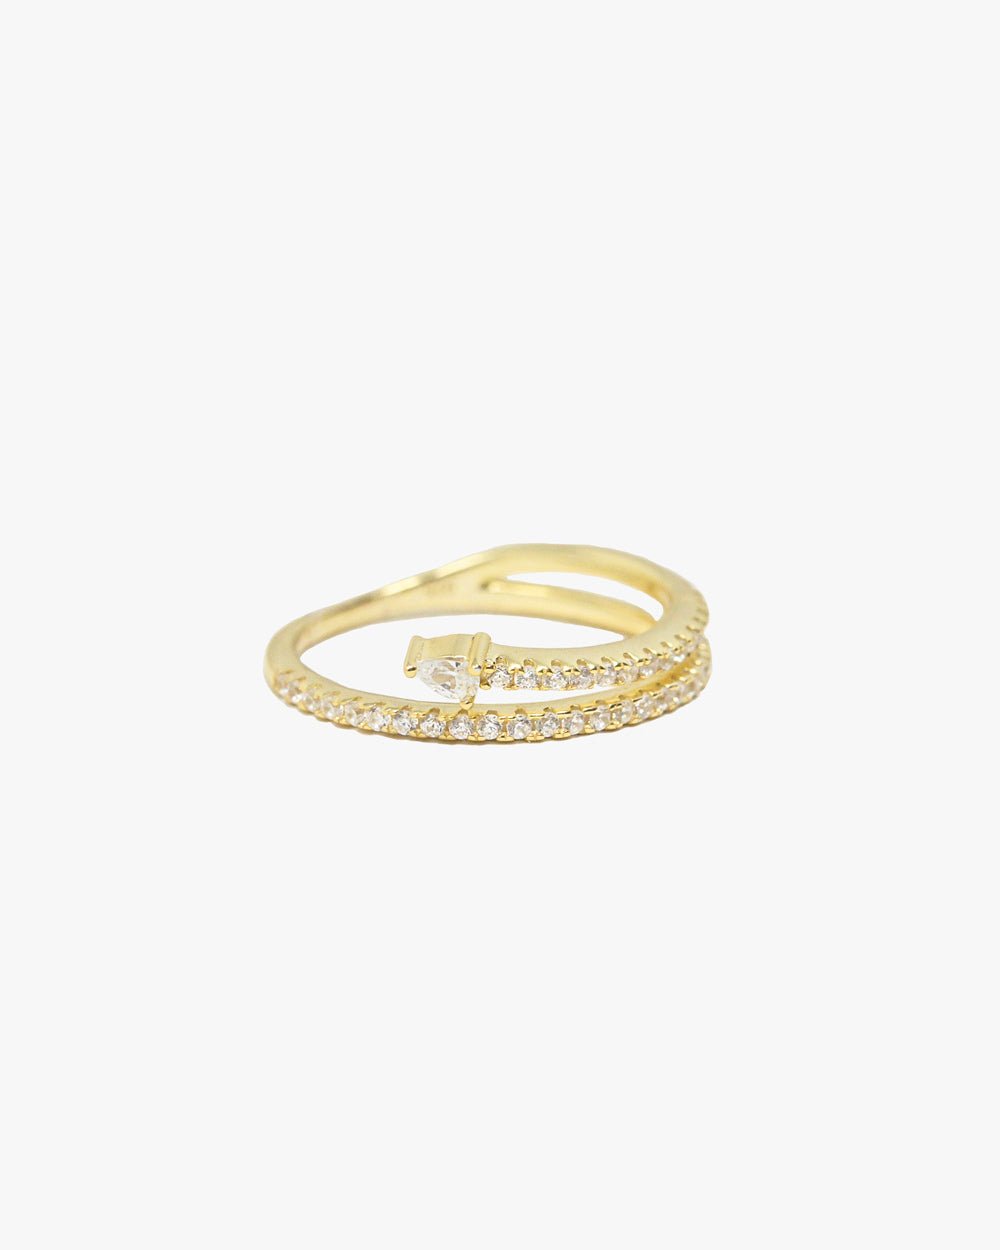 PIPER CZ WRAP RING - Shop Cupcakes and Cashmere